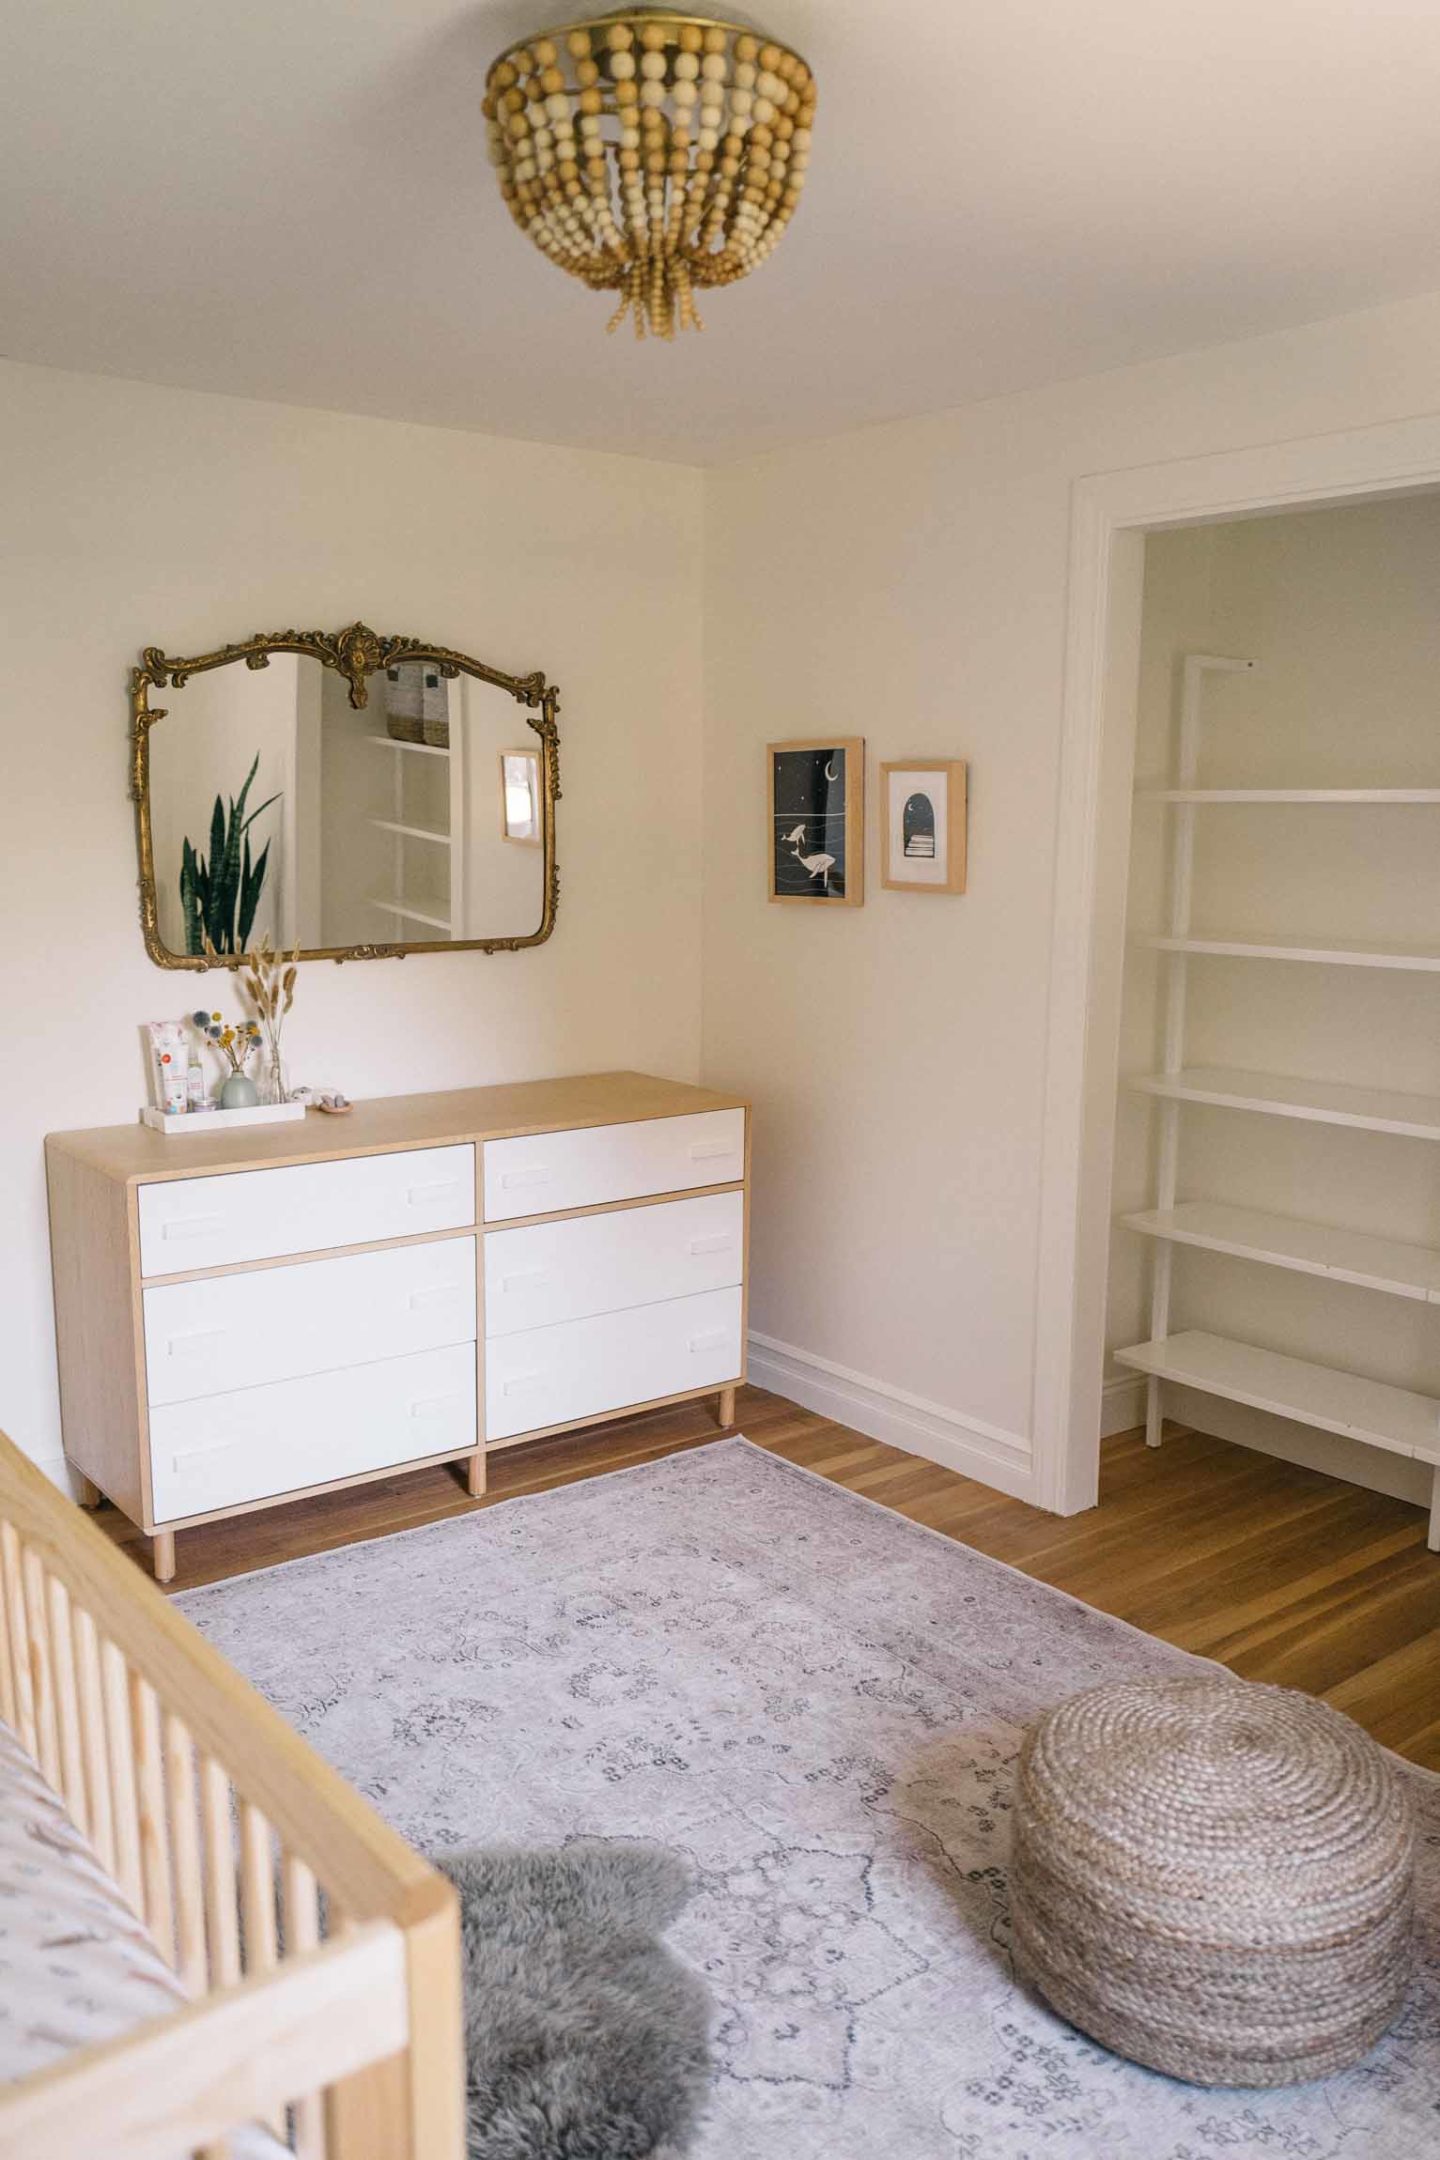 Jess Ann Kirby keeps decor and furniture simple in her new gender neutral nursery.